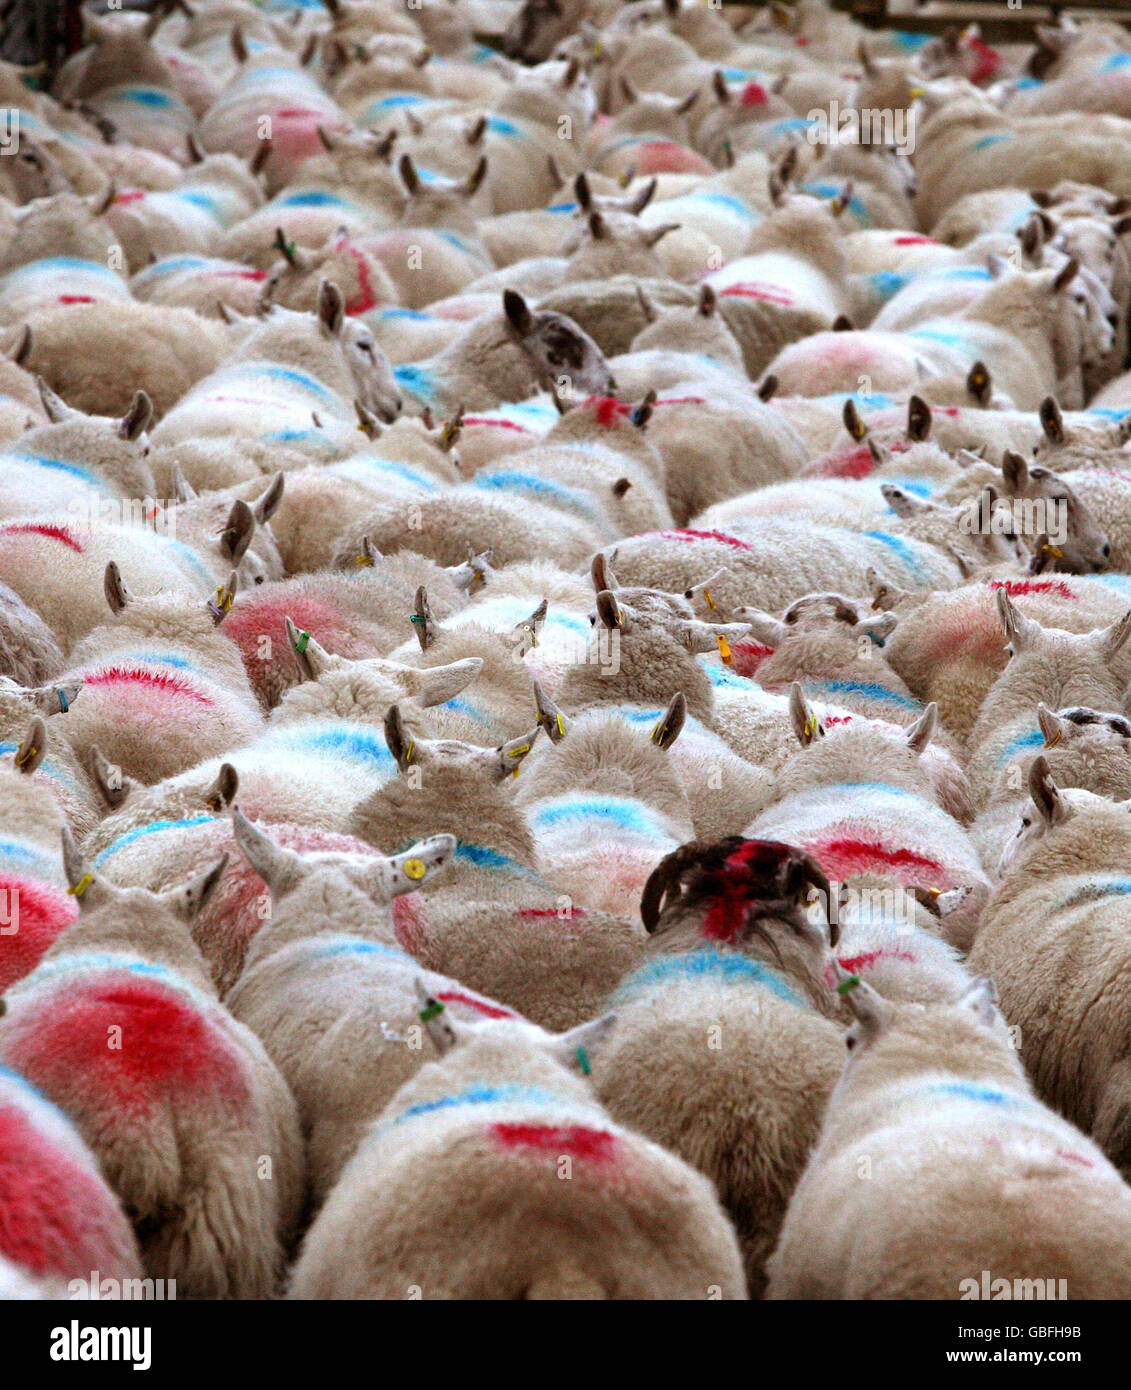 Sheep are rounded up at Craigannet farm near Carronbridge, central Scotland, before being checked with a sector scanner to see how many lambs they are carrying. Stock Photo